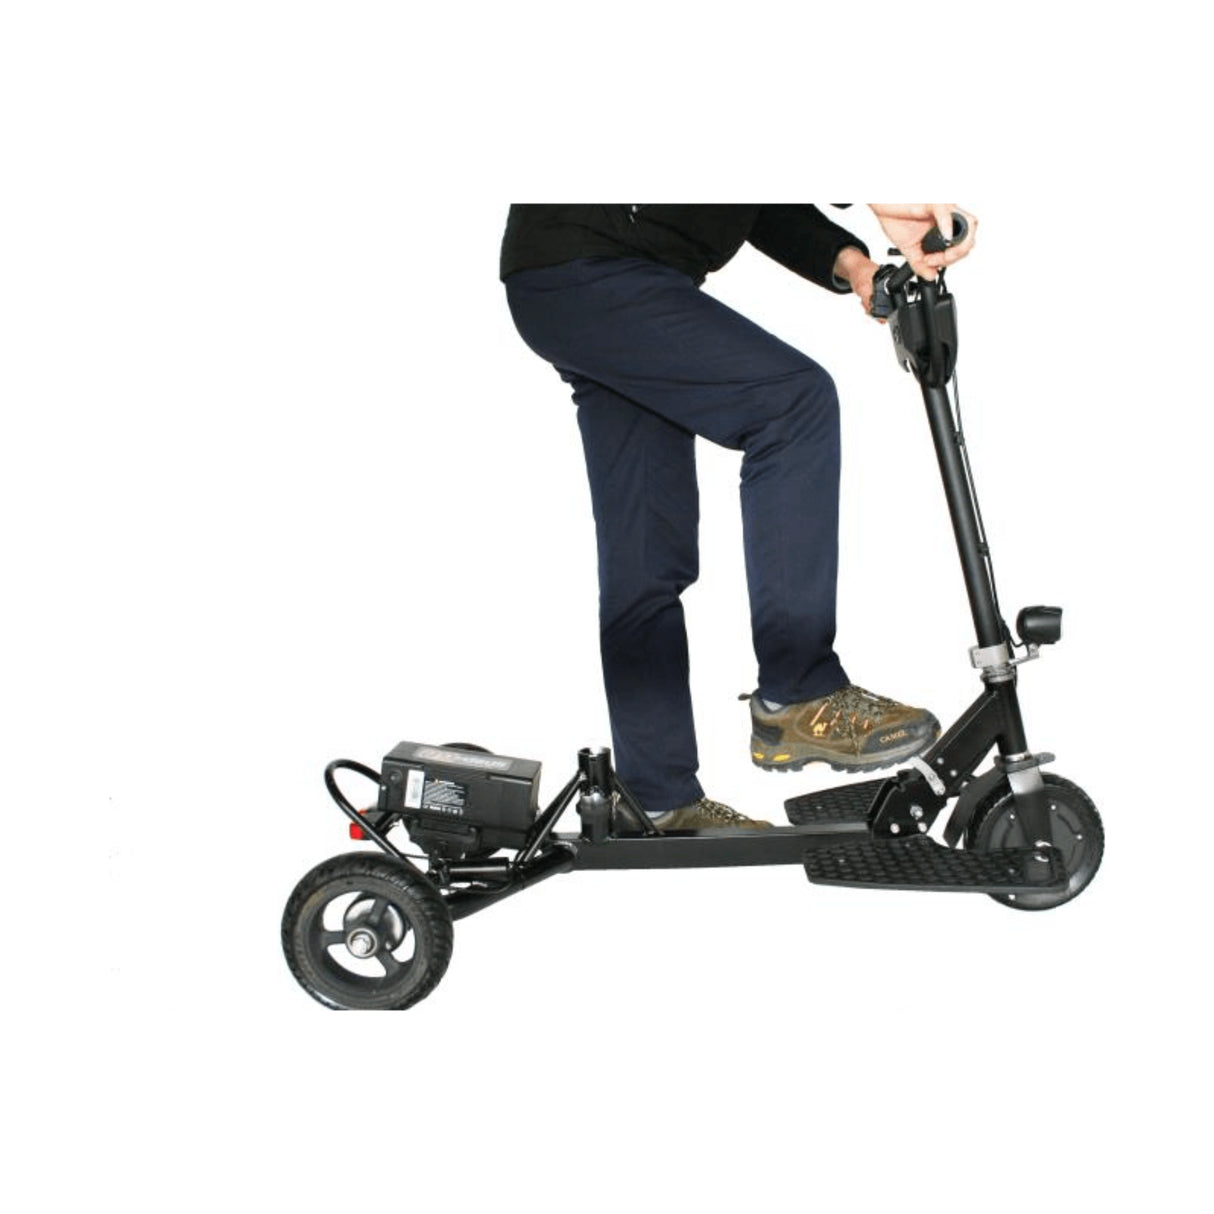 Glion SNAPnGO Model 335 Lightweight Foldable Electric Scooter